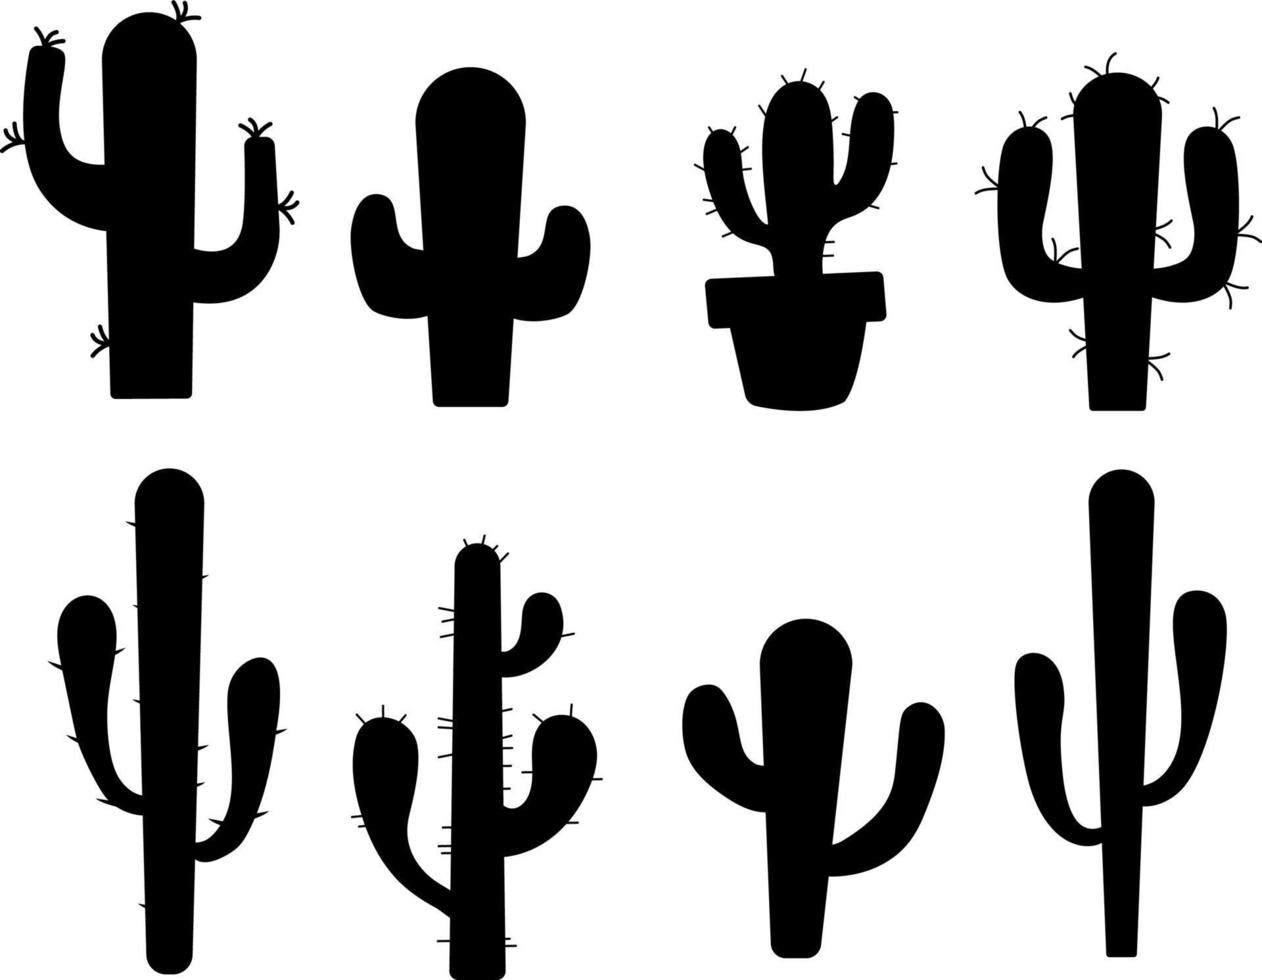 cacti silhouettes, desert plants collection. simple style isolated illustration. vector